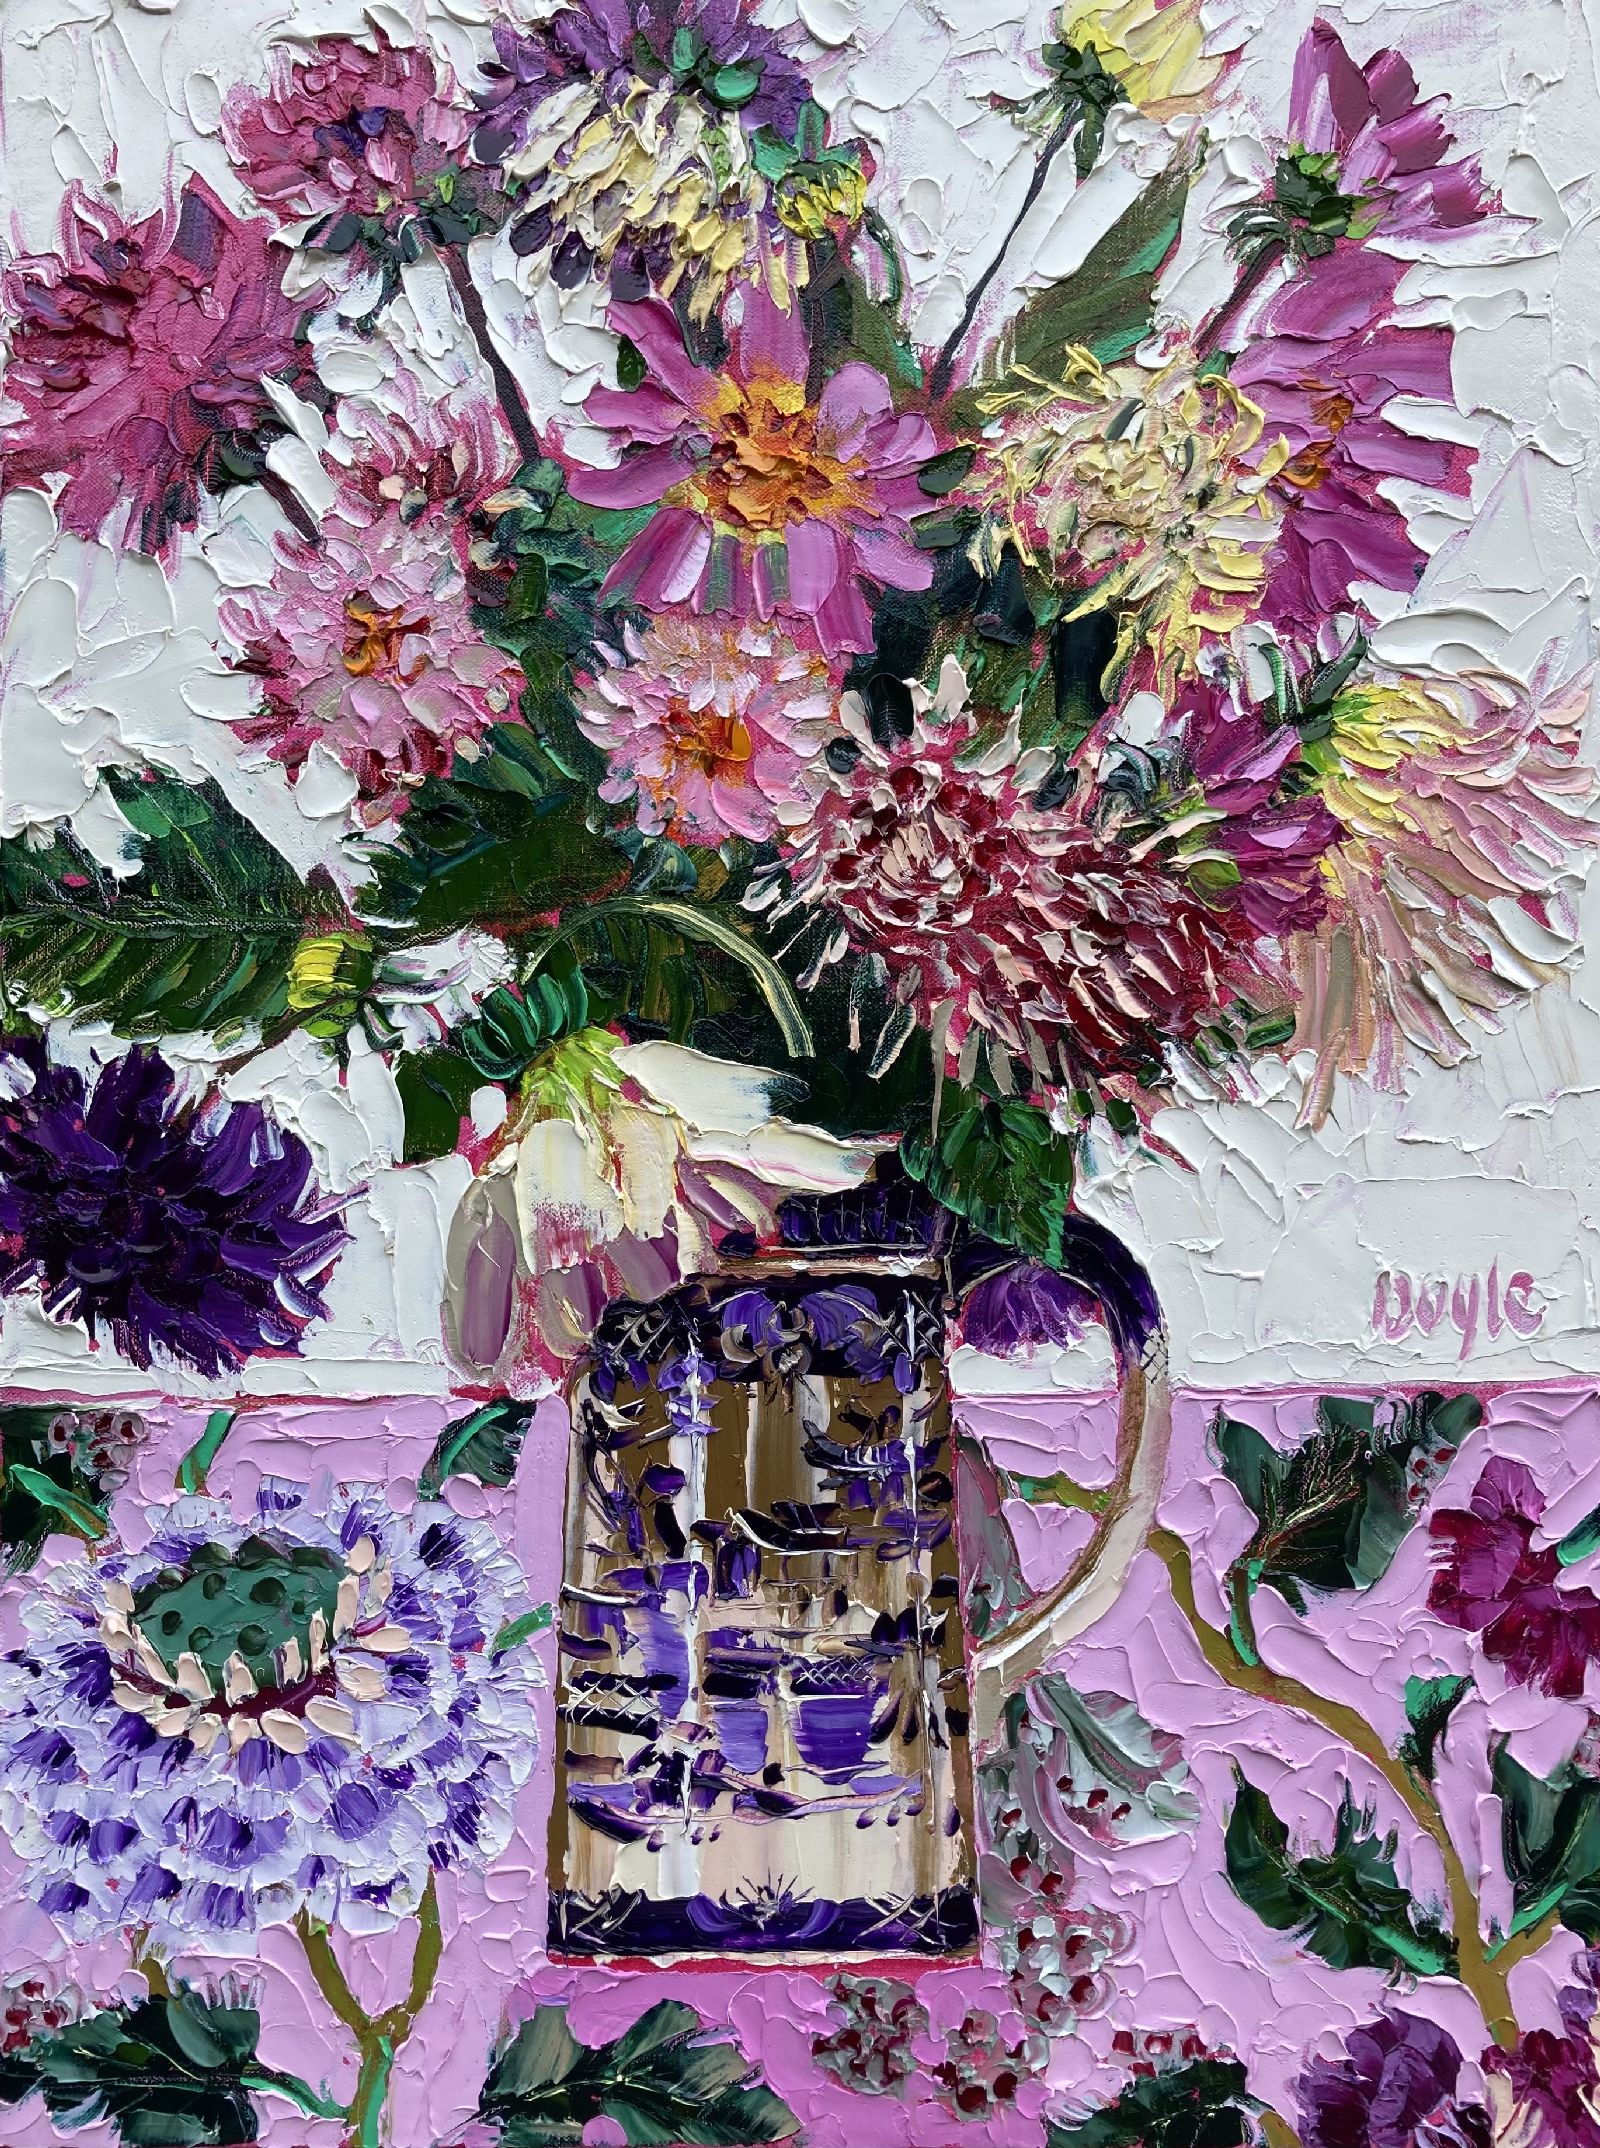 October Dahlias by Lucy Doyle